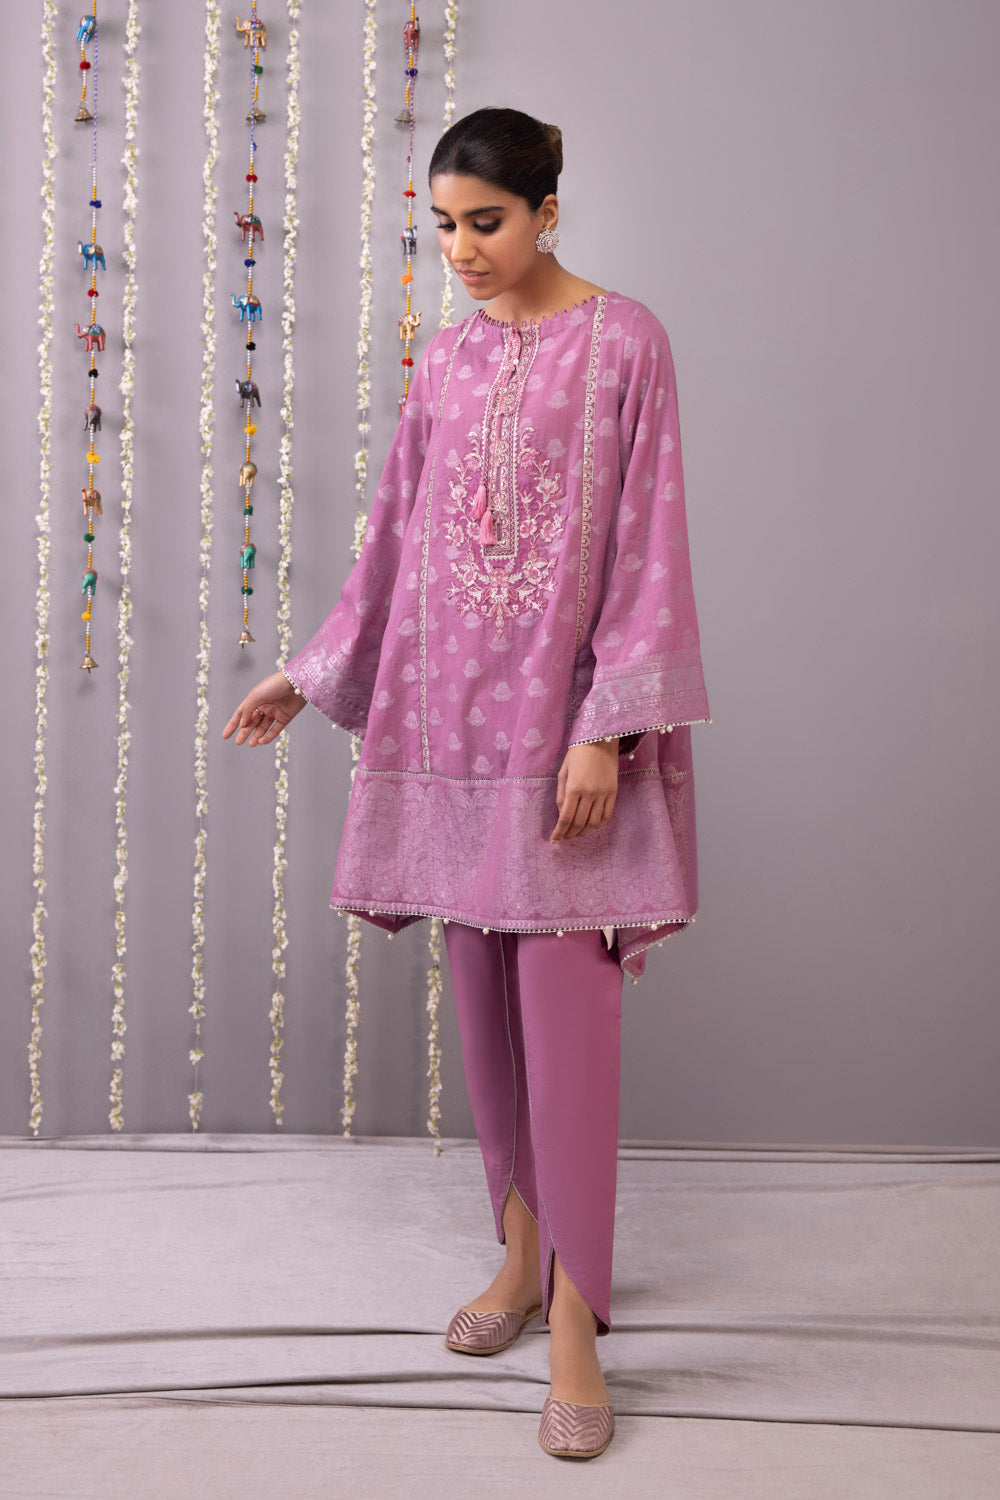 Sapphire 2 Piece - Embroidered Jacquard Suit Pink